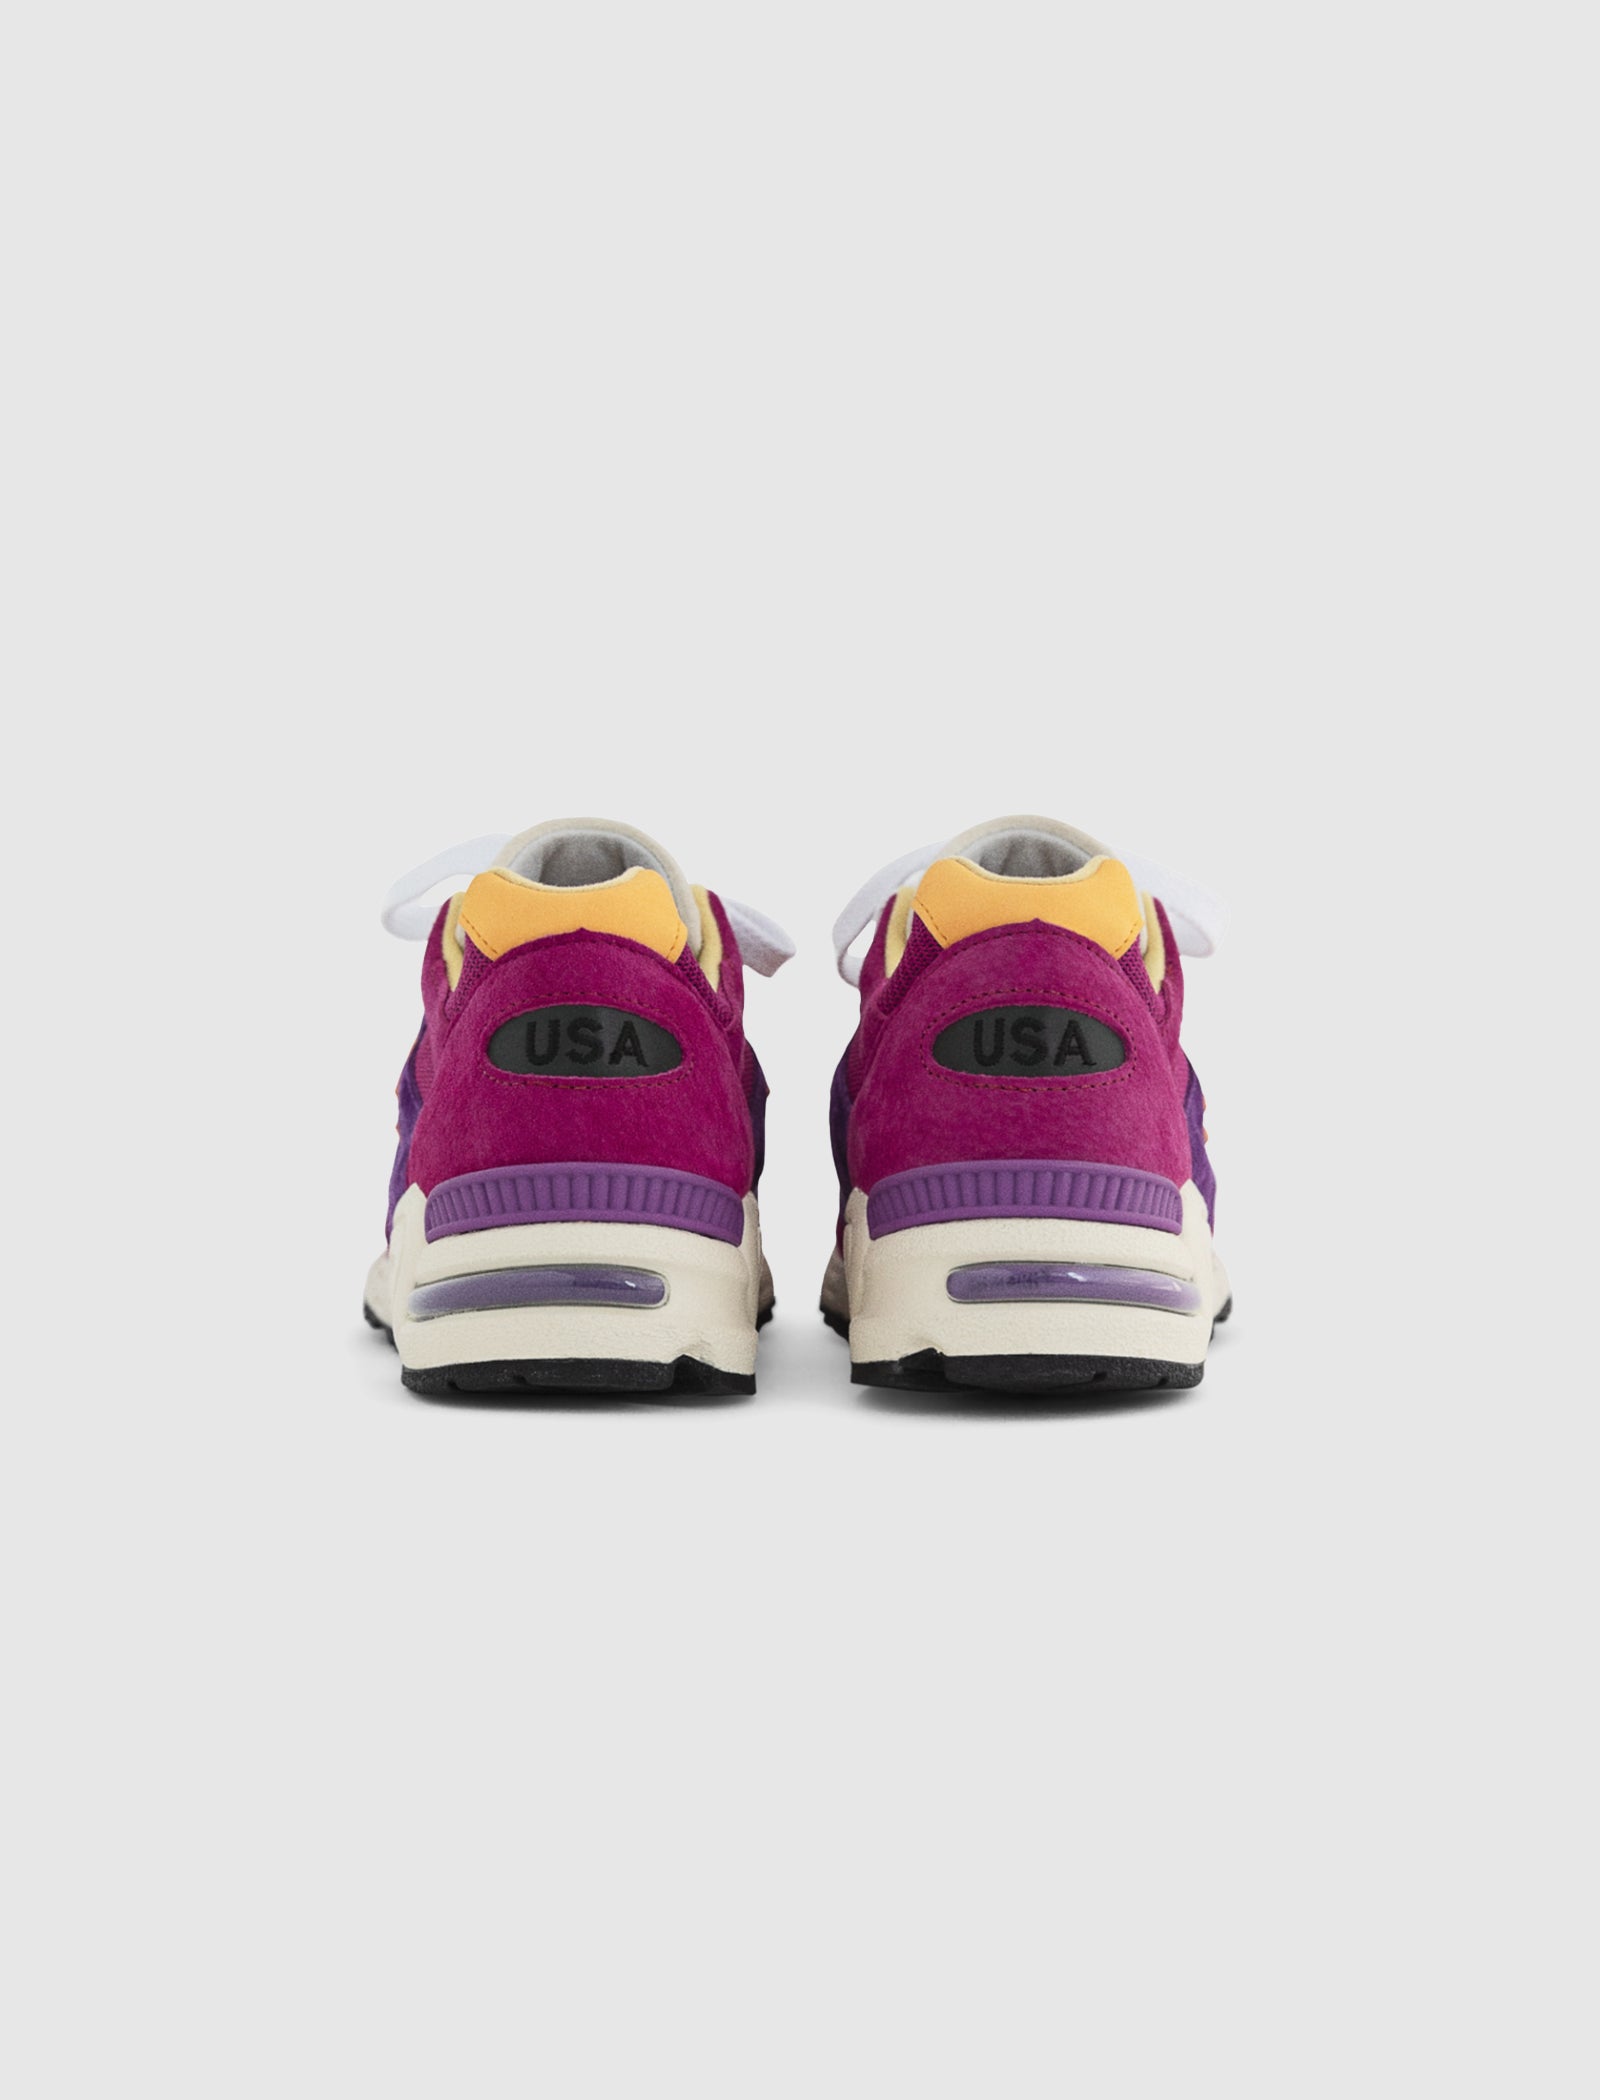 990 V2 MADE IN USA "PINK/PURPLE"